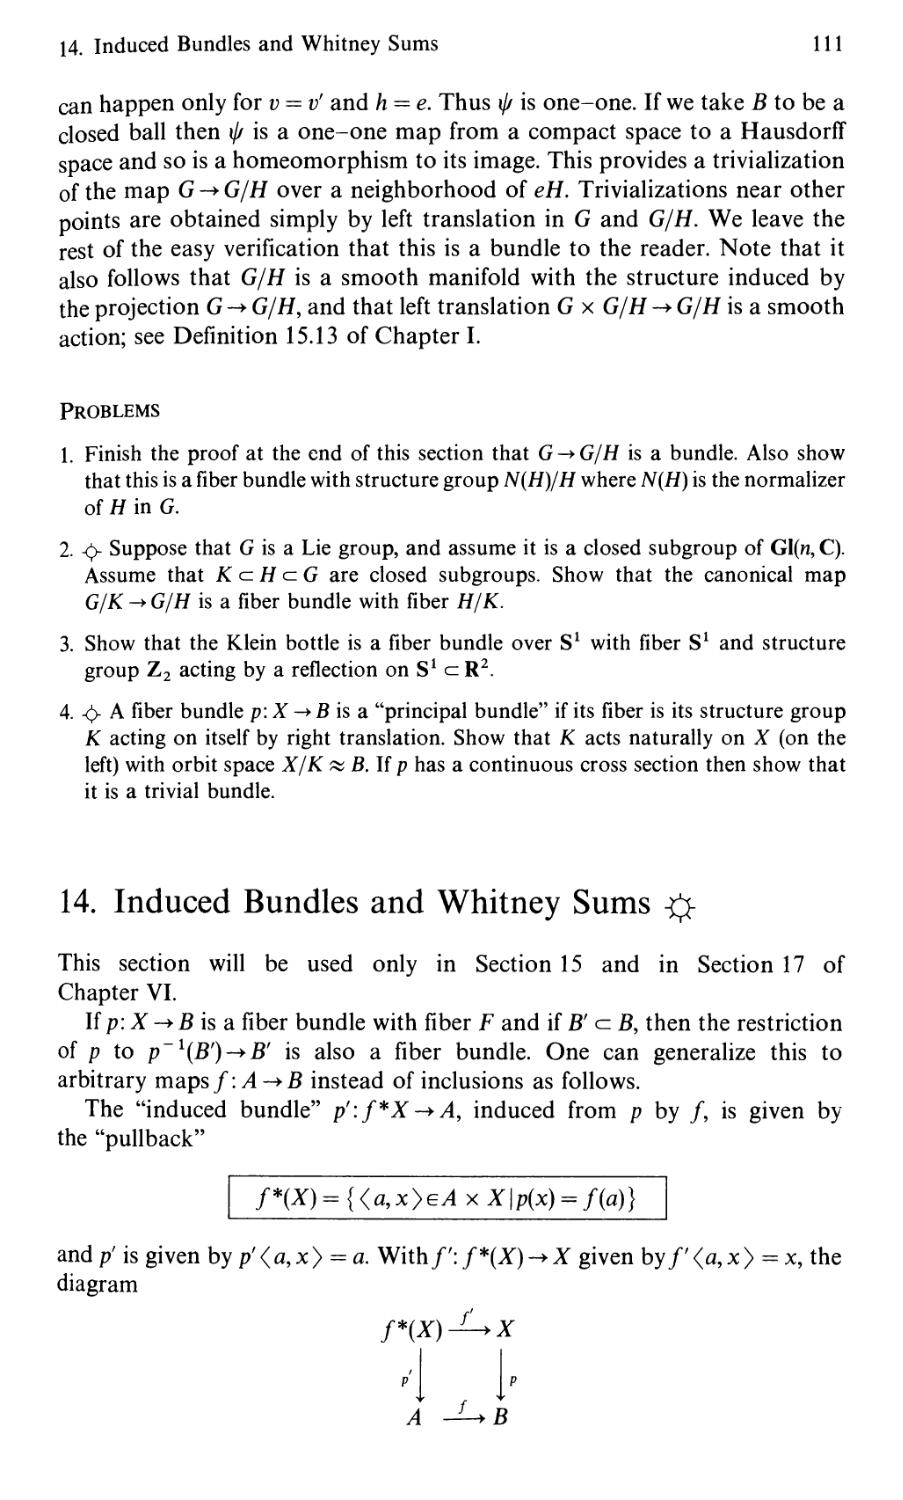 14. Induced Bundles and Whitney Sums